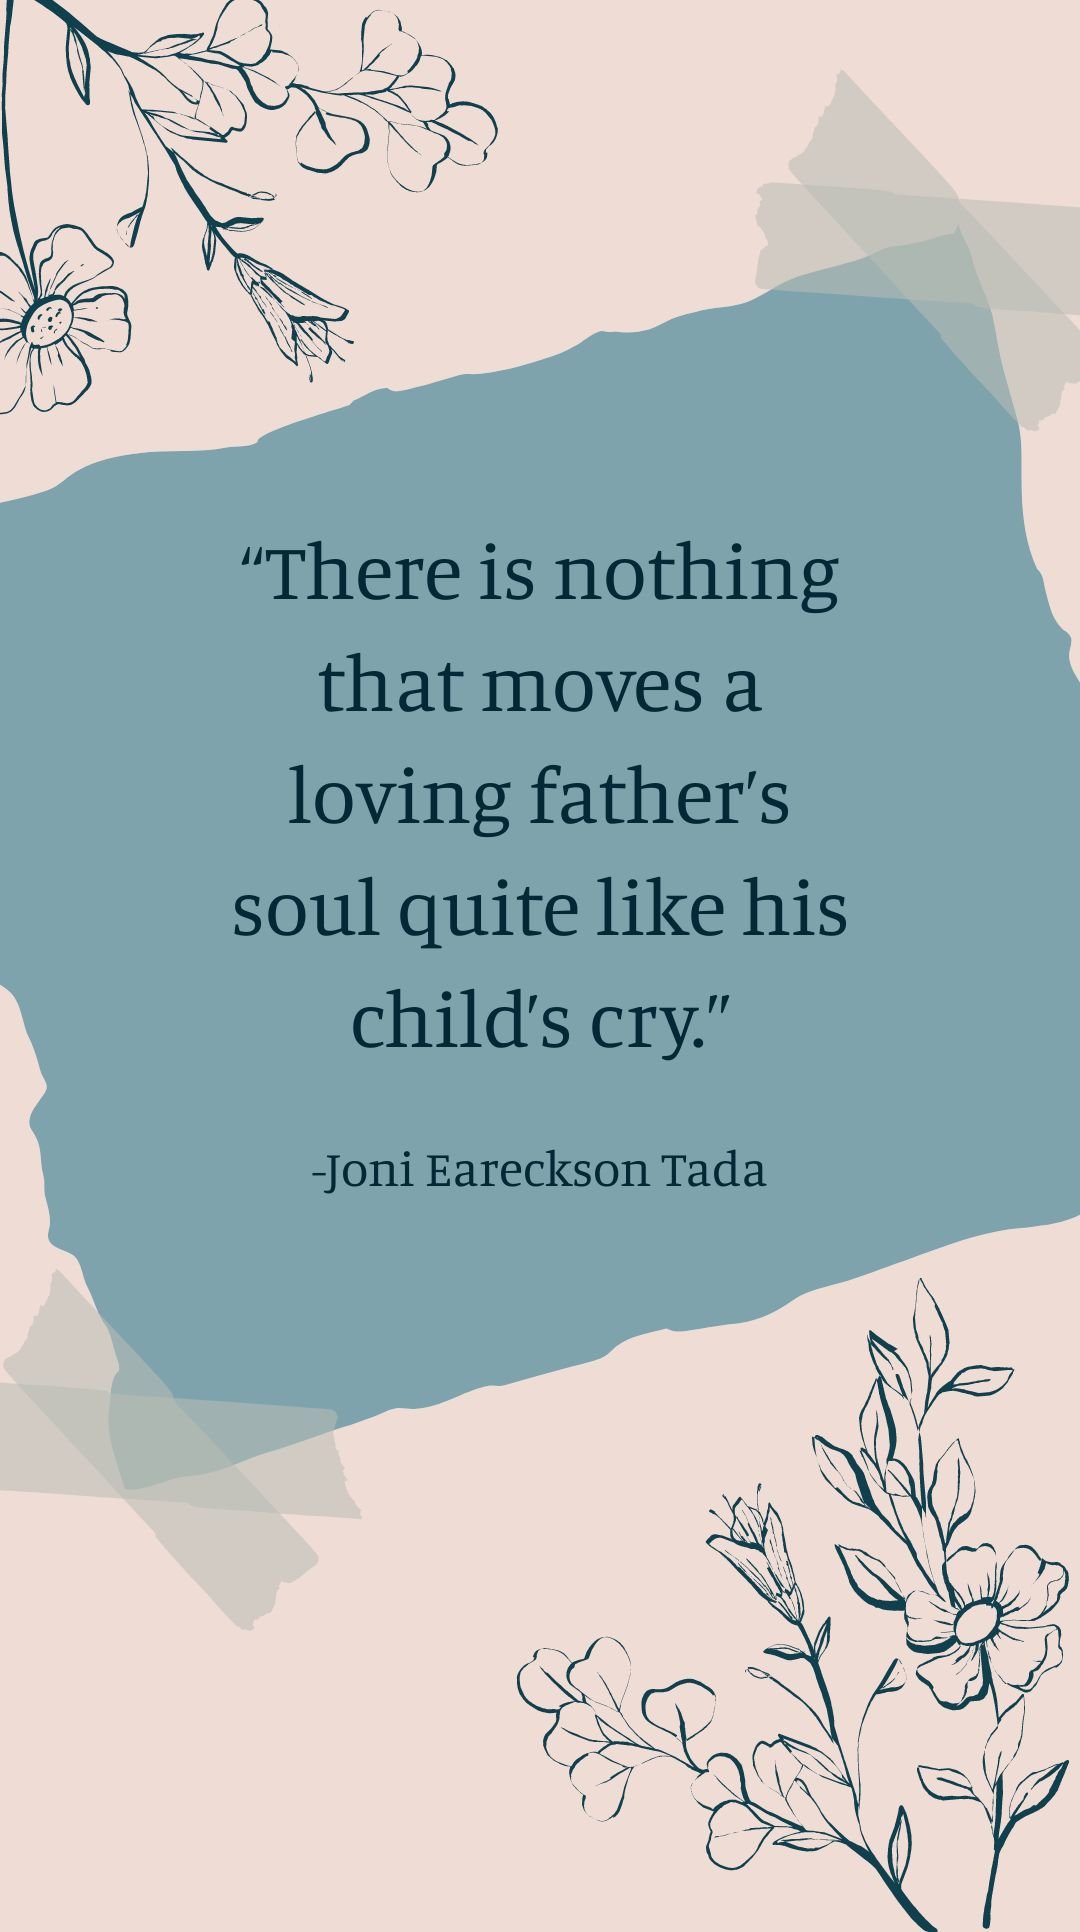 Joni Eareckson Tada - There is nothing that moves a loving father’s soul quite like his child’s cry.